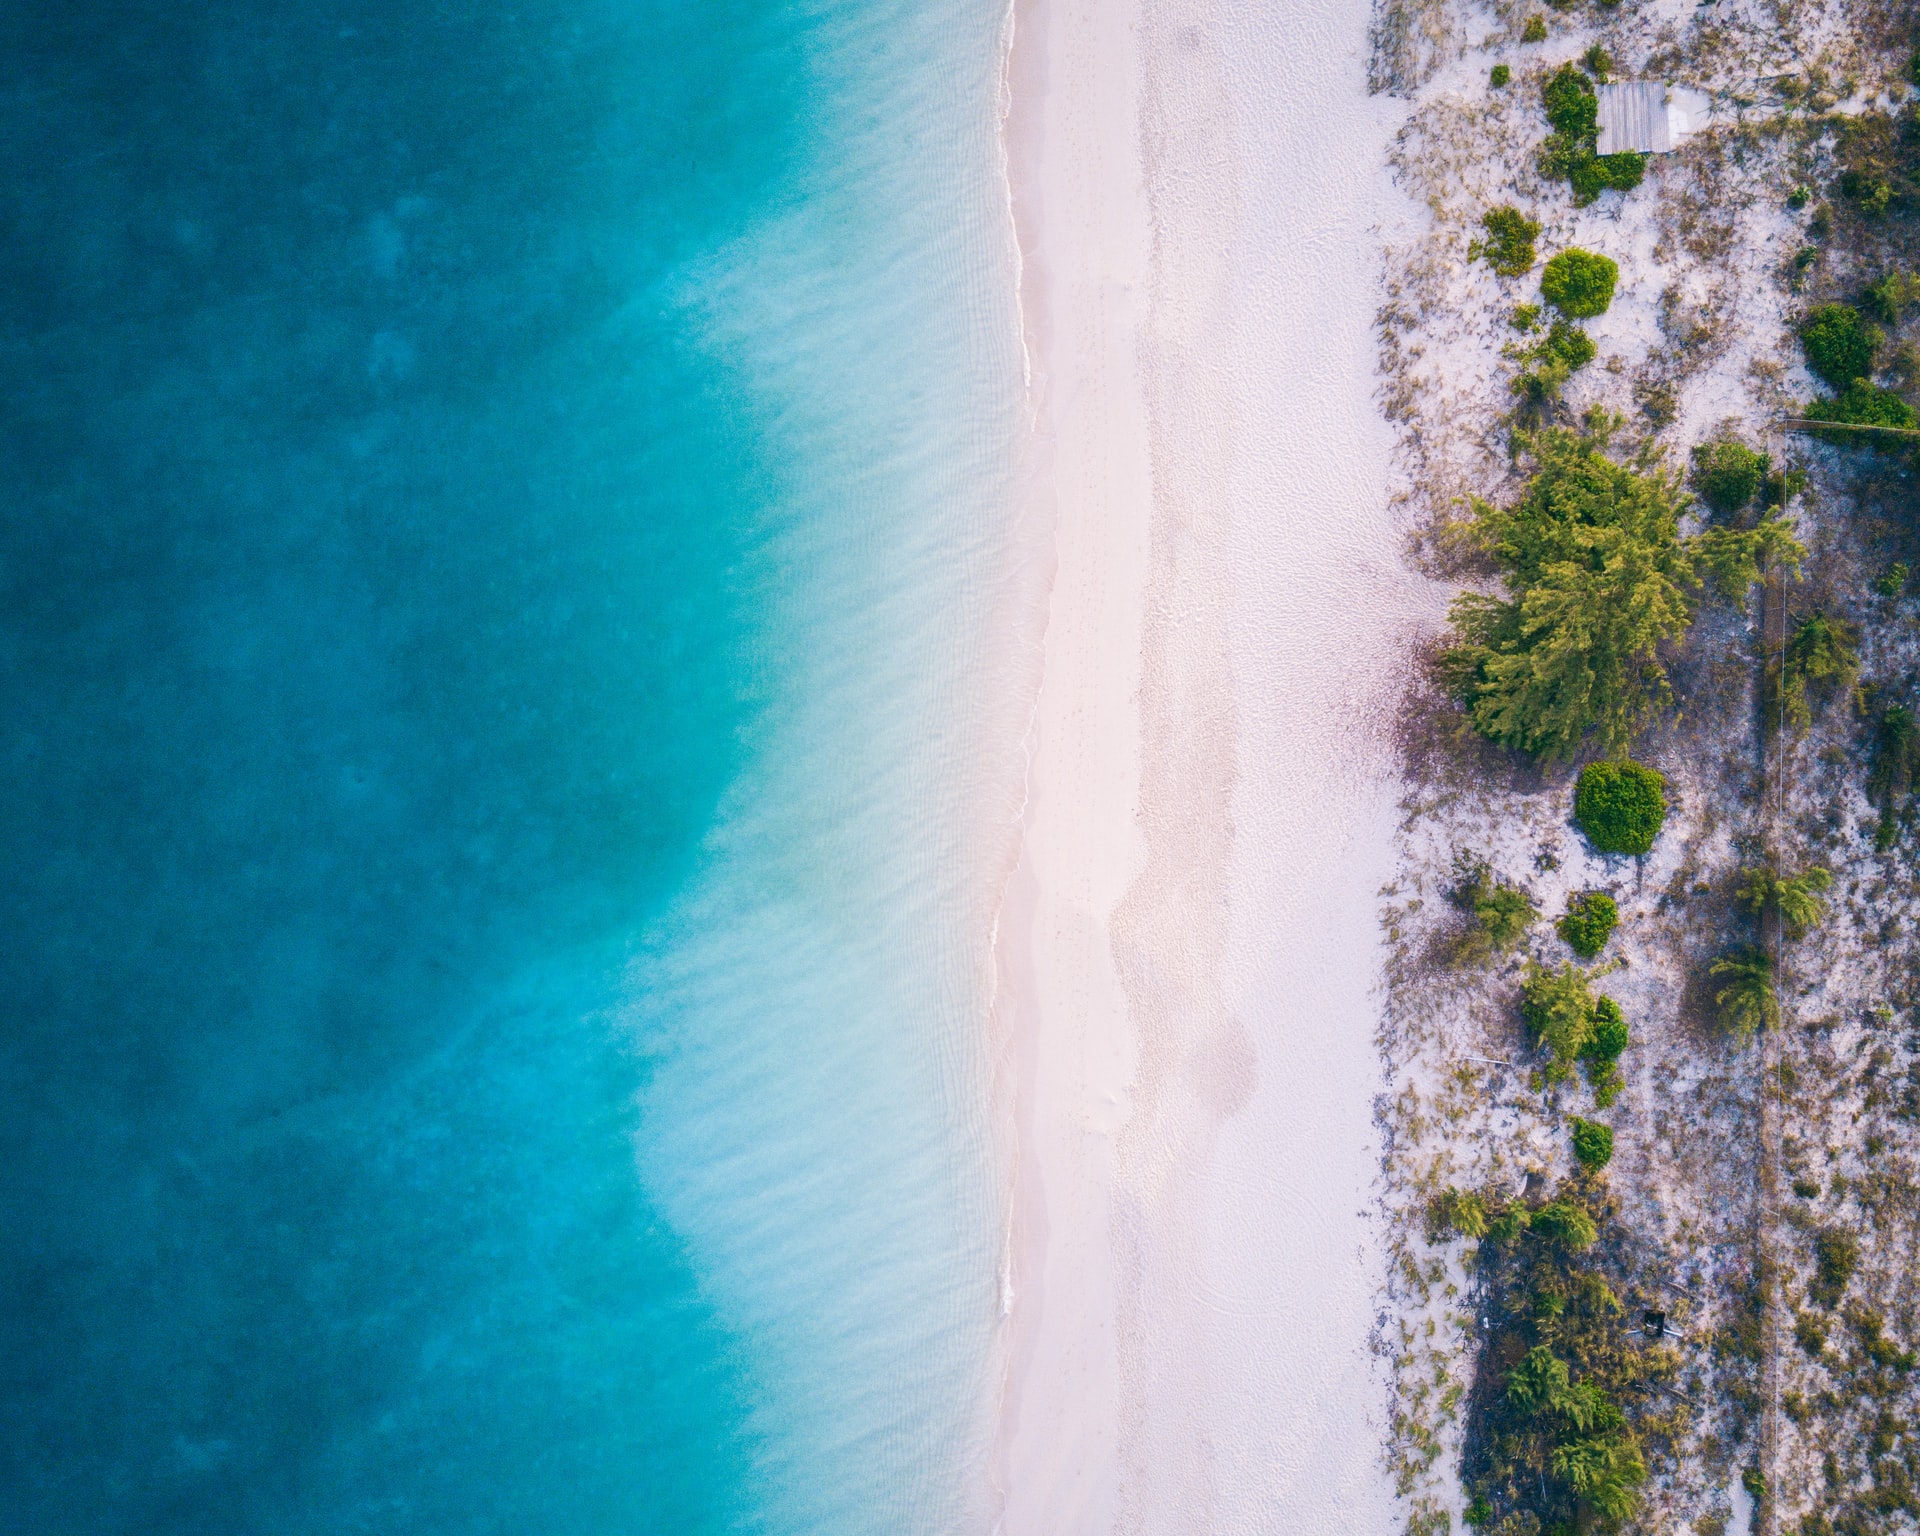 Aerial photograph of flat and walkable Grace Bay Beach in Turks and Caicos; left third of picture showing clear turquoise waters, middle third- white sand, and right third- green trees and vegetation